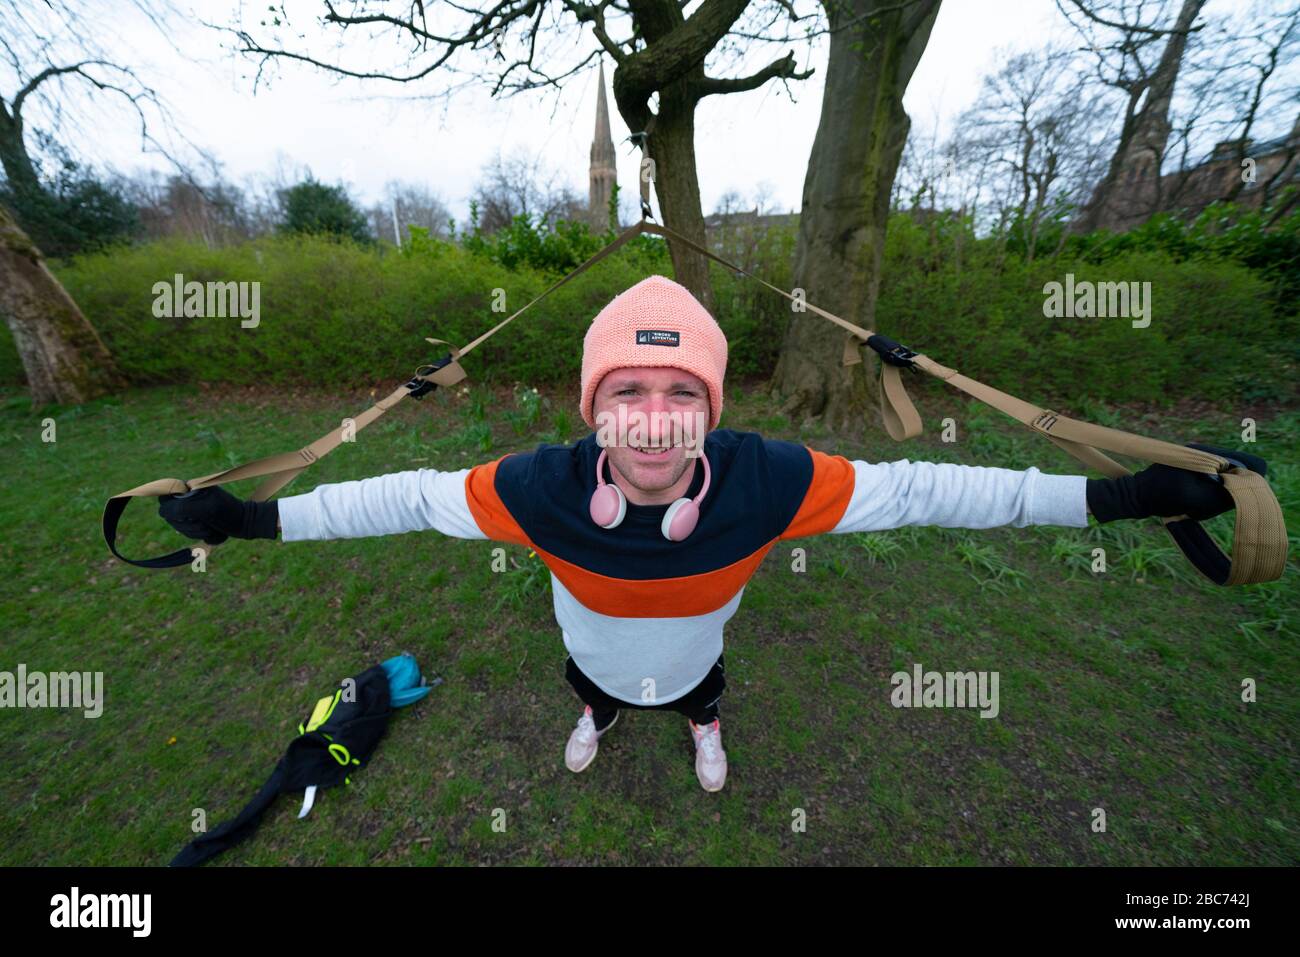 Glasgow, Scotland, UK. 3 April, 2020. Images from the southside of Glasgow at the end of the second week of Coronavirus lockdown. Pictured, Hamish Orr a resident of Govanhill works out in Queens Park.   Iain Masterton/Alamy Live News Stock Photo